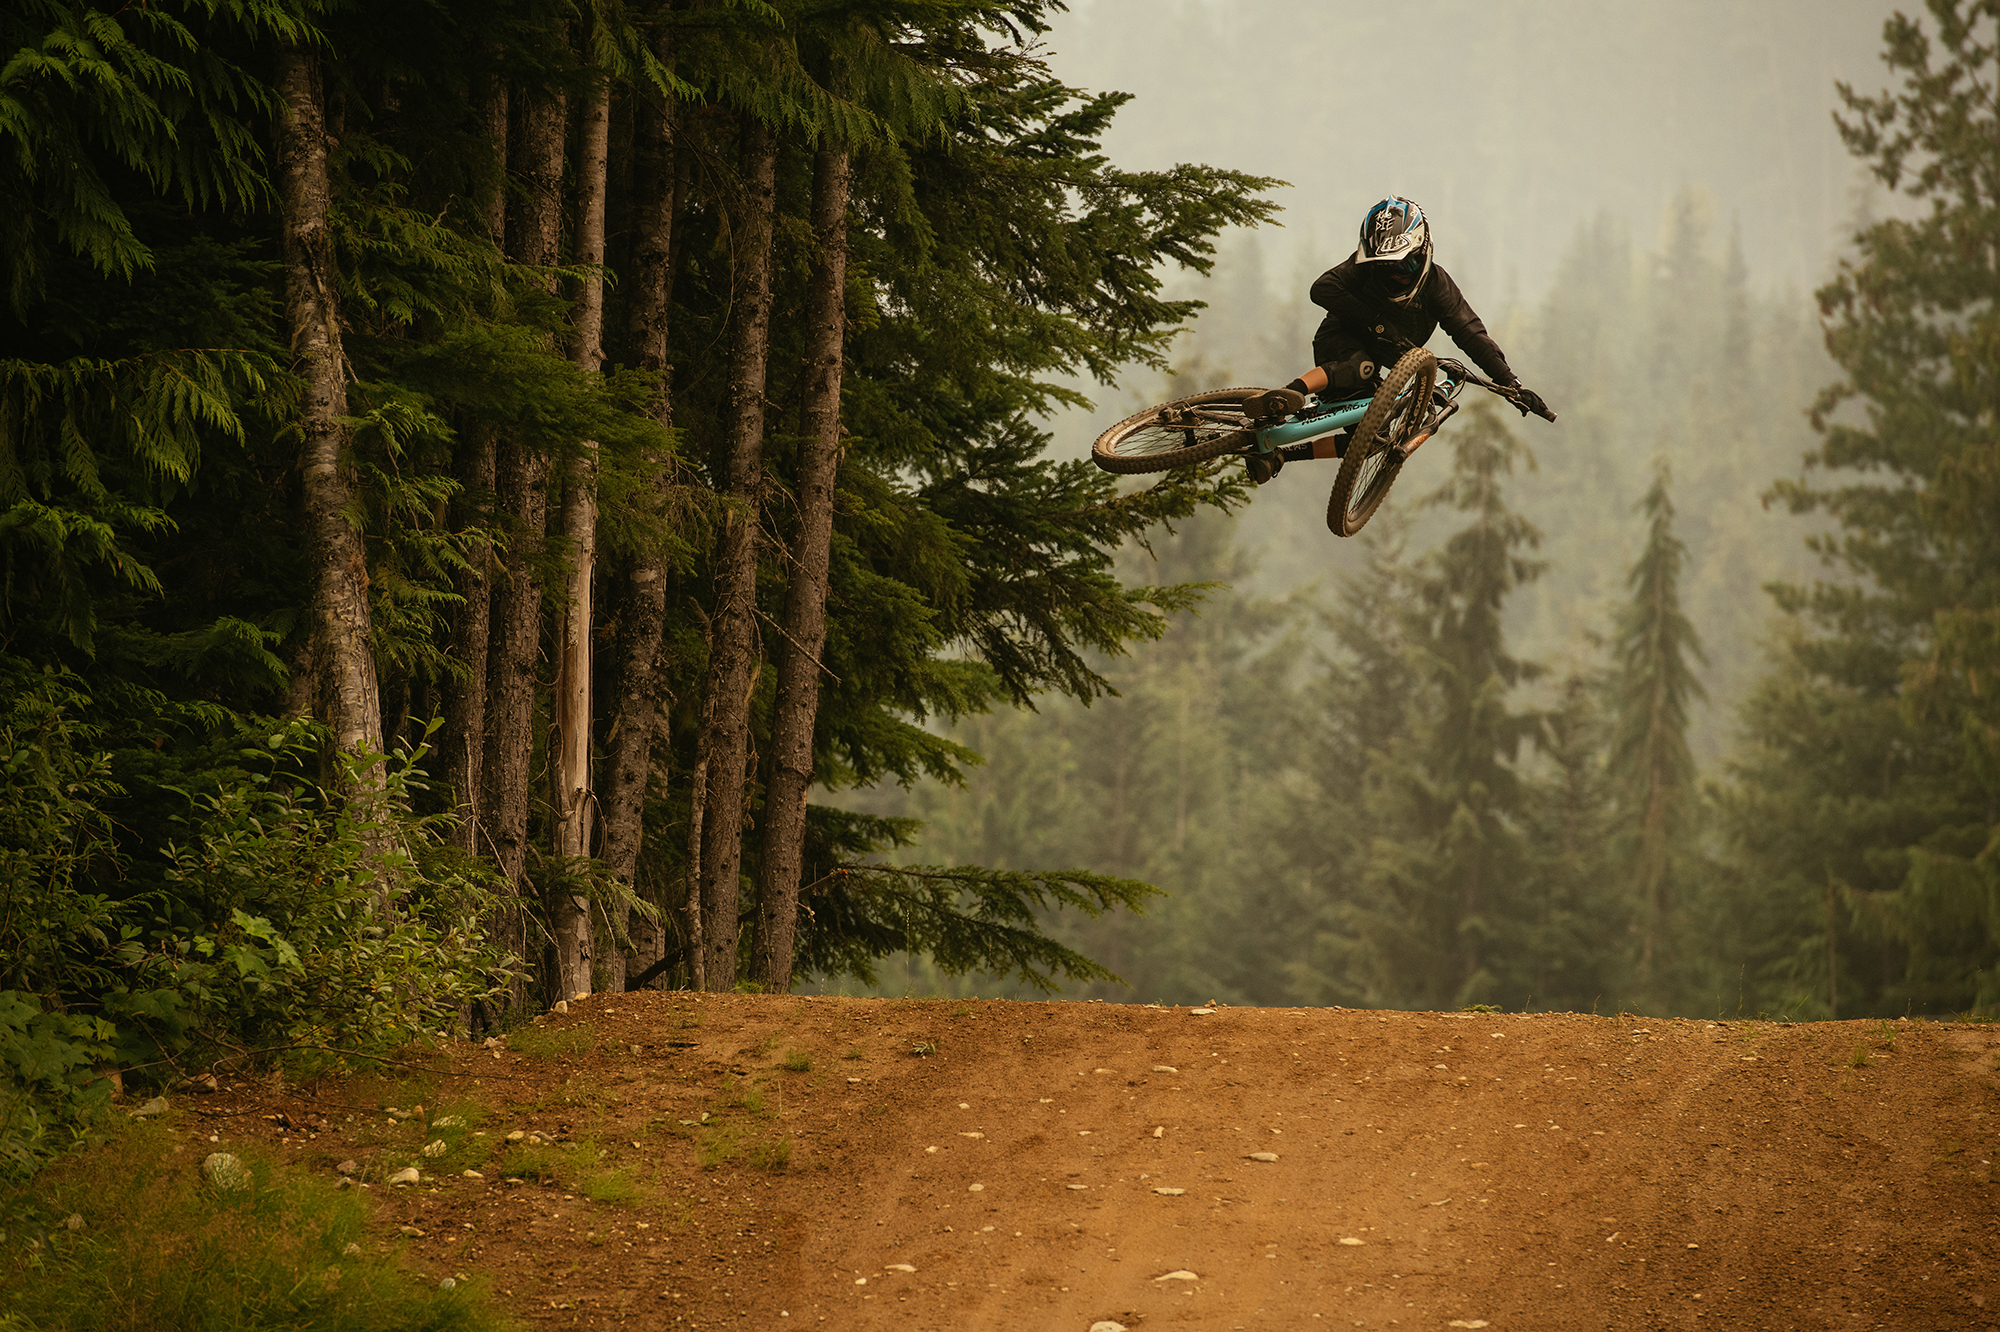 Groms won’t fear the Reaper on Rocky Mountain’s new youth trail bikes